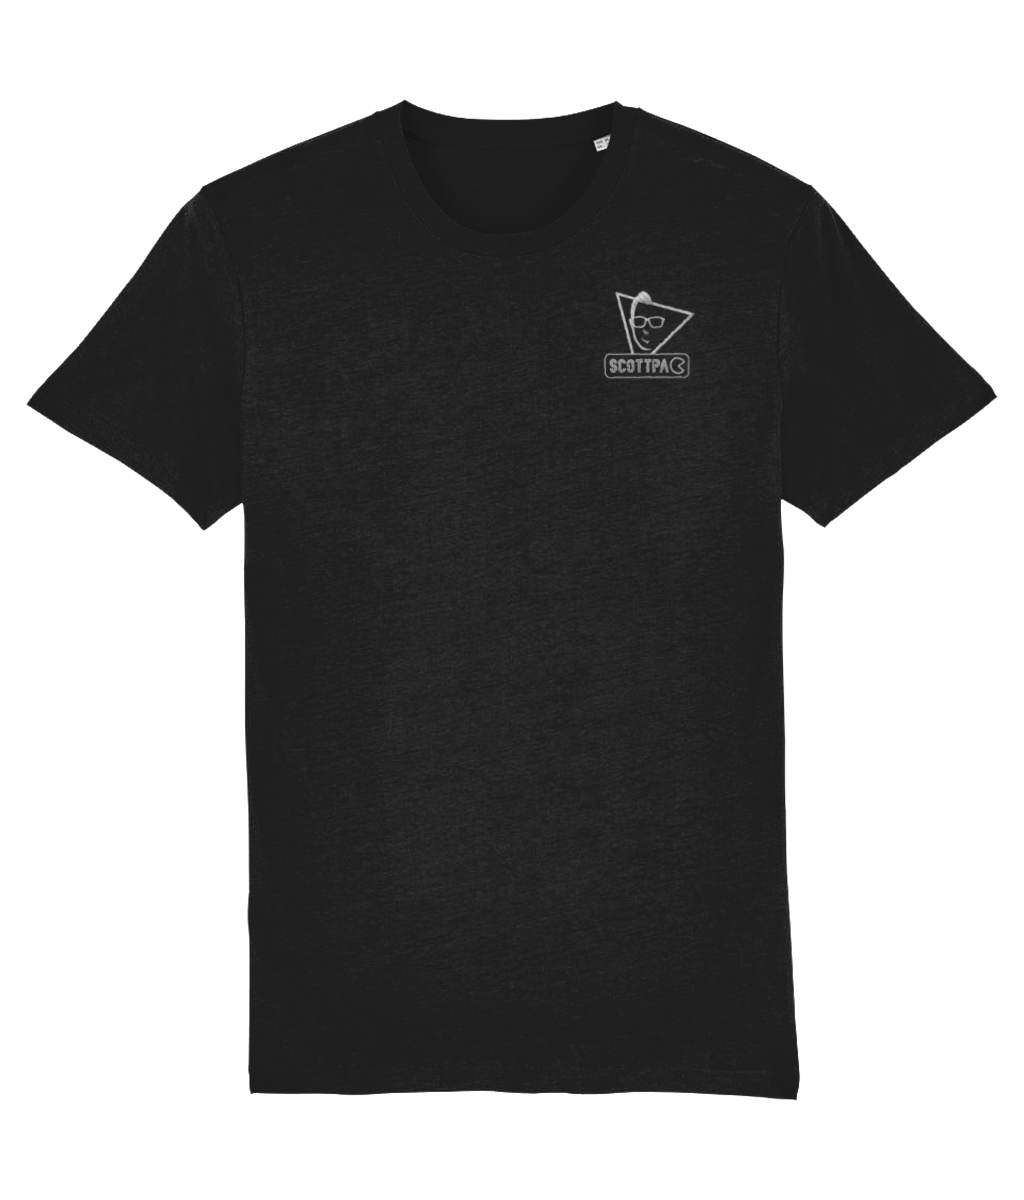 Scottpac Embroidered T-Shirt